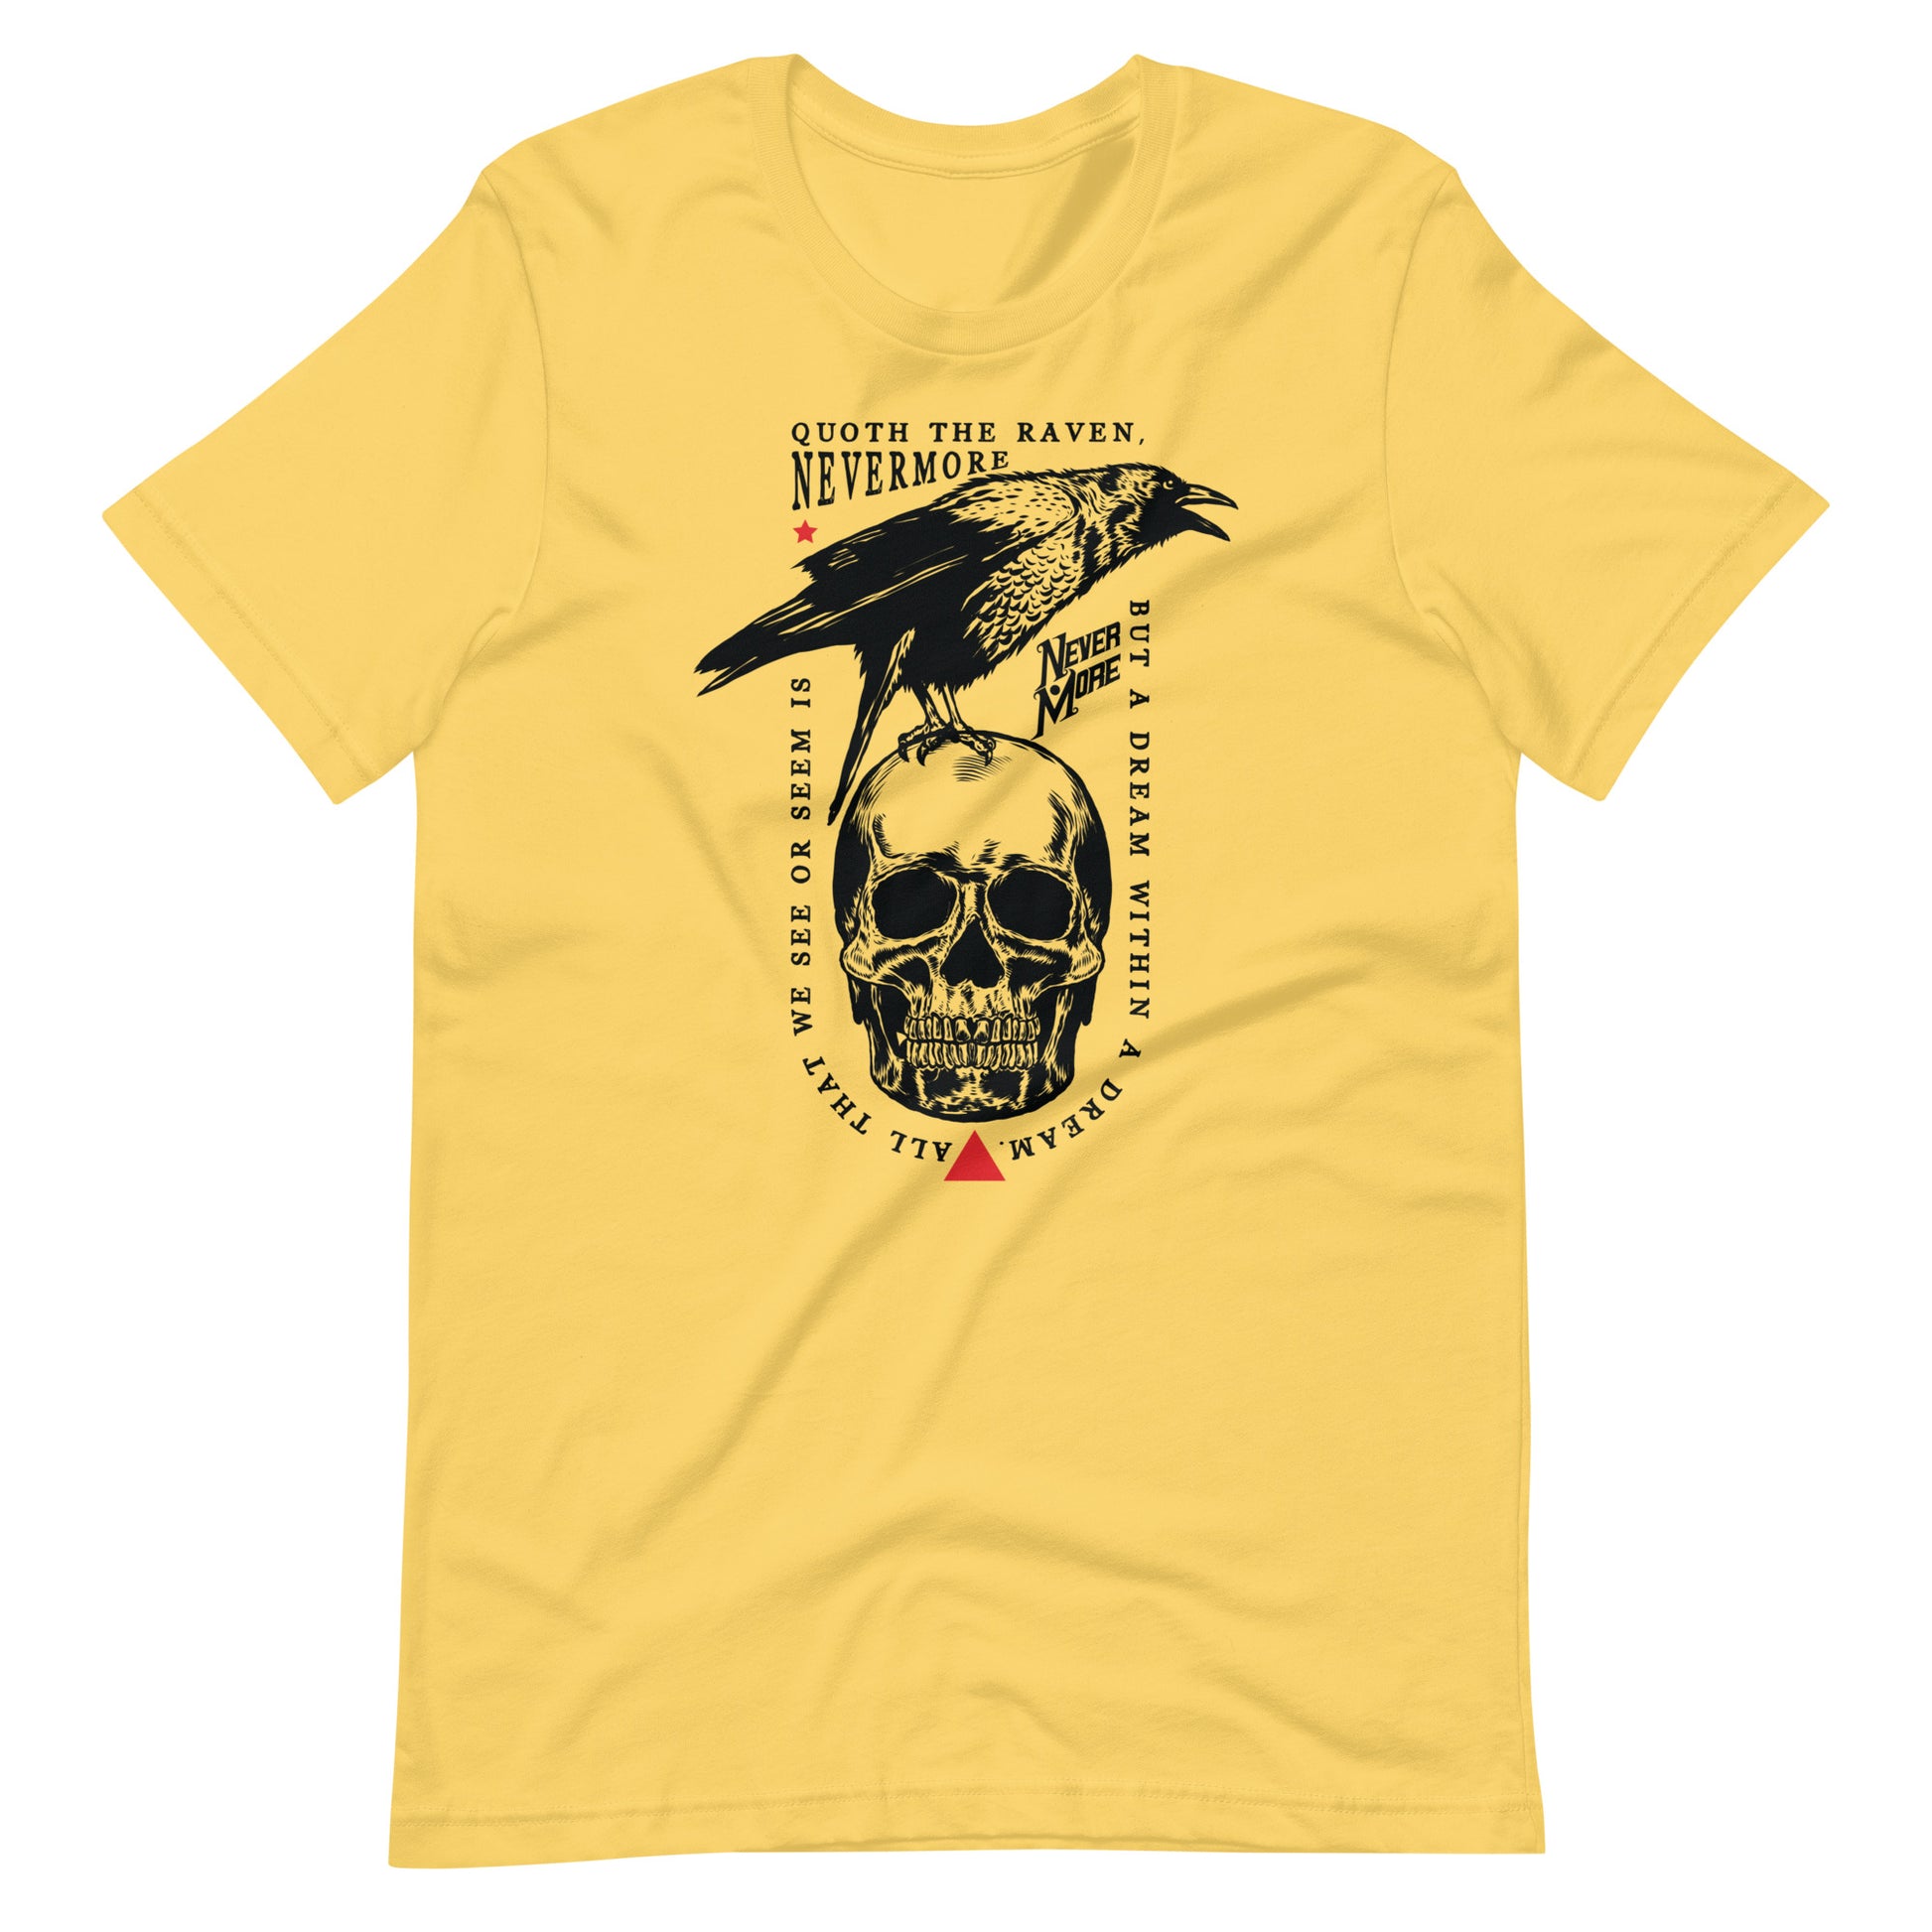 Quoth the Raven - Men's t-shirt - Yellow Front